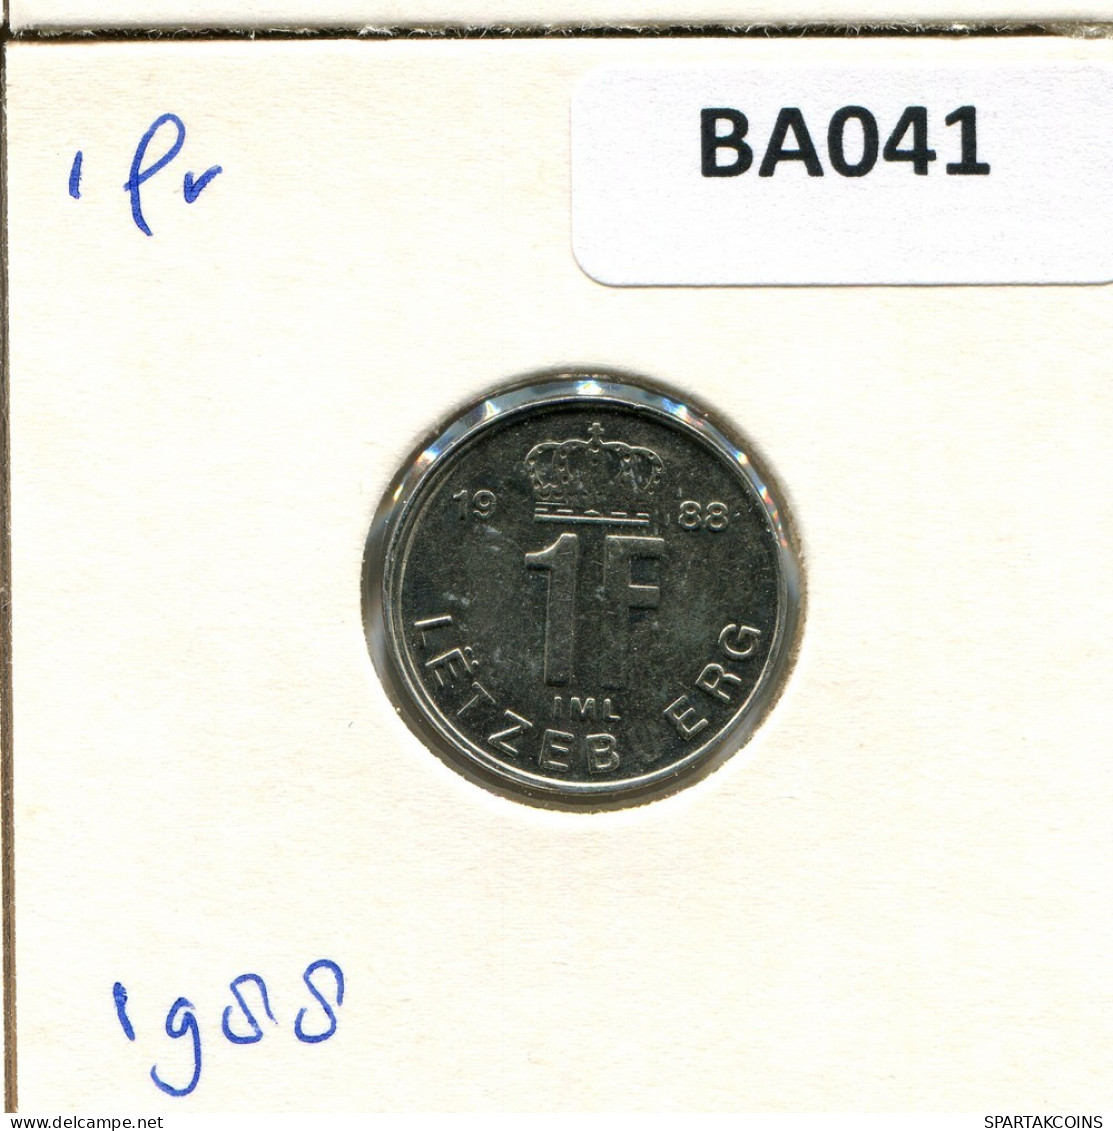 1 FRANC 1988 LUXEMBOURG Pièce #BA041.F.A - Luxemburgo